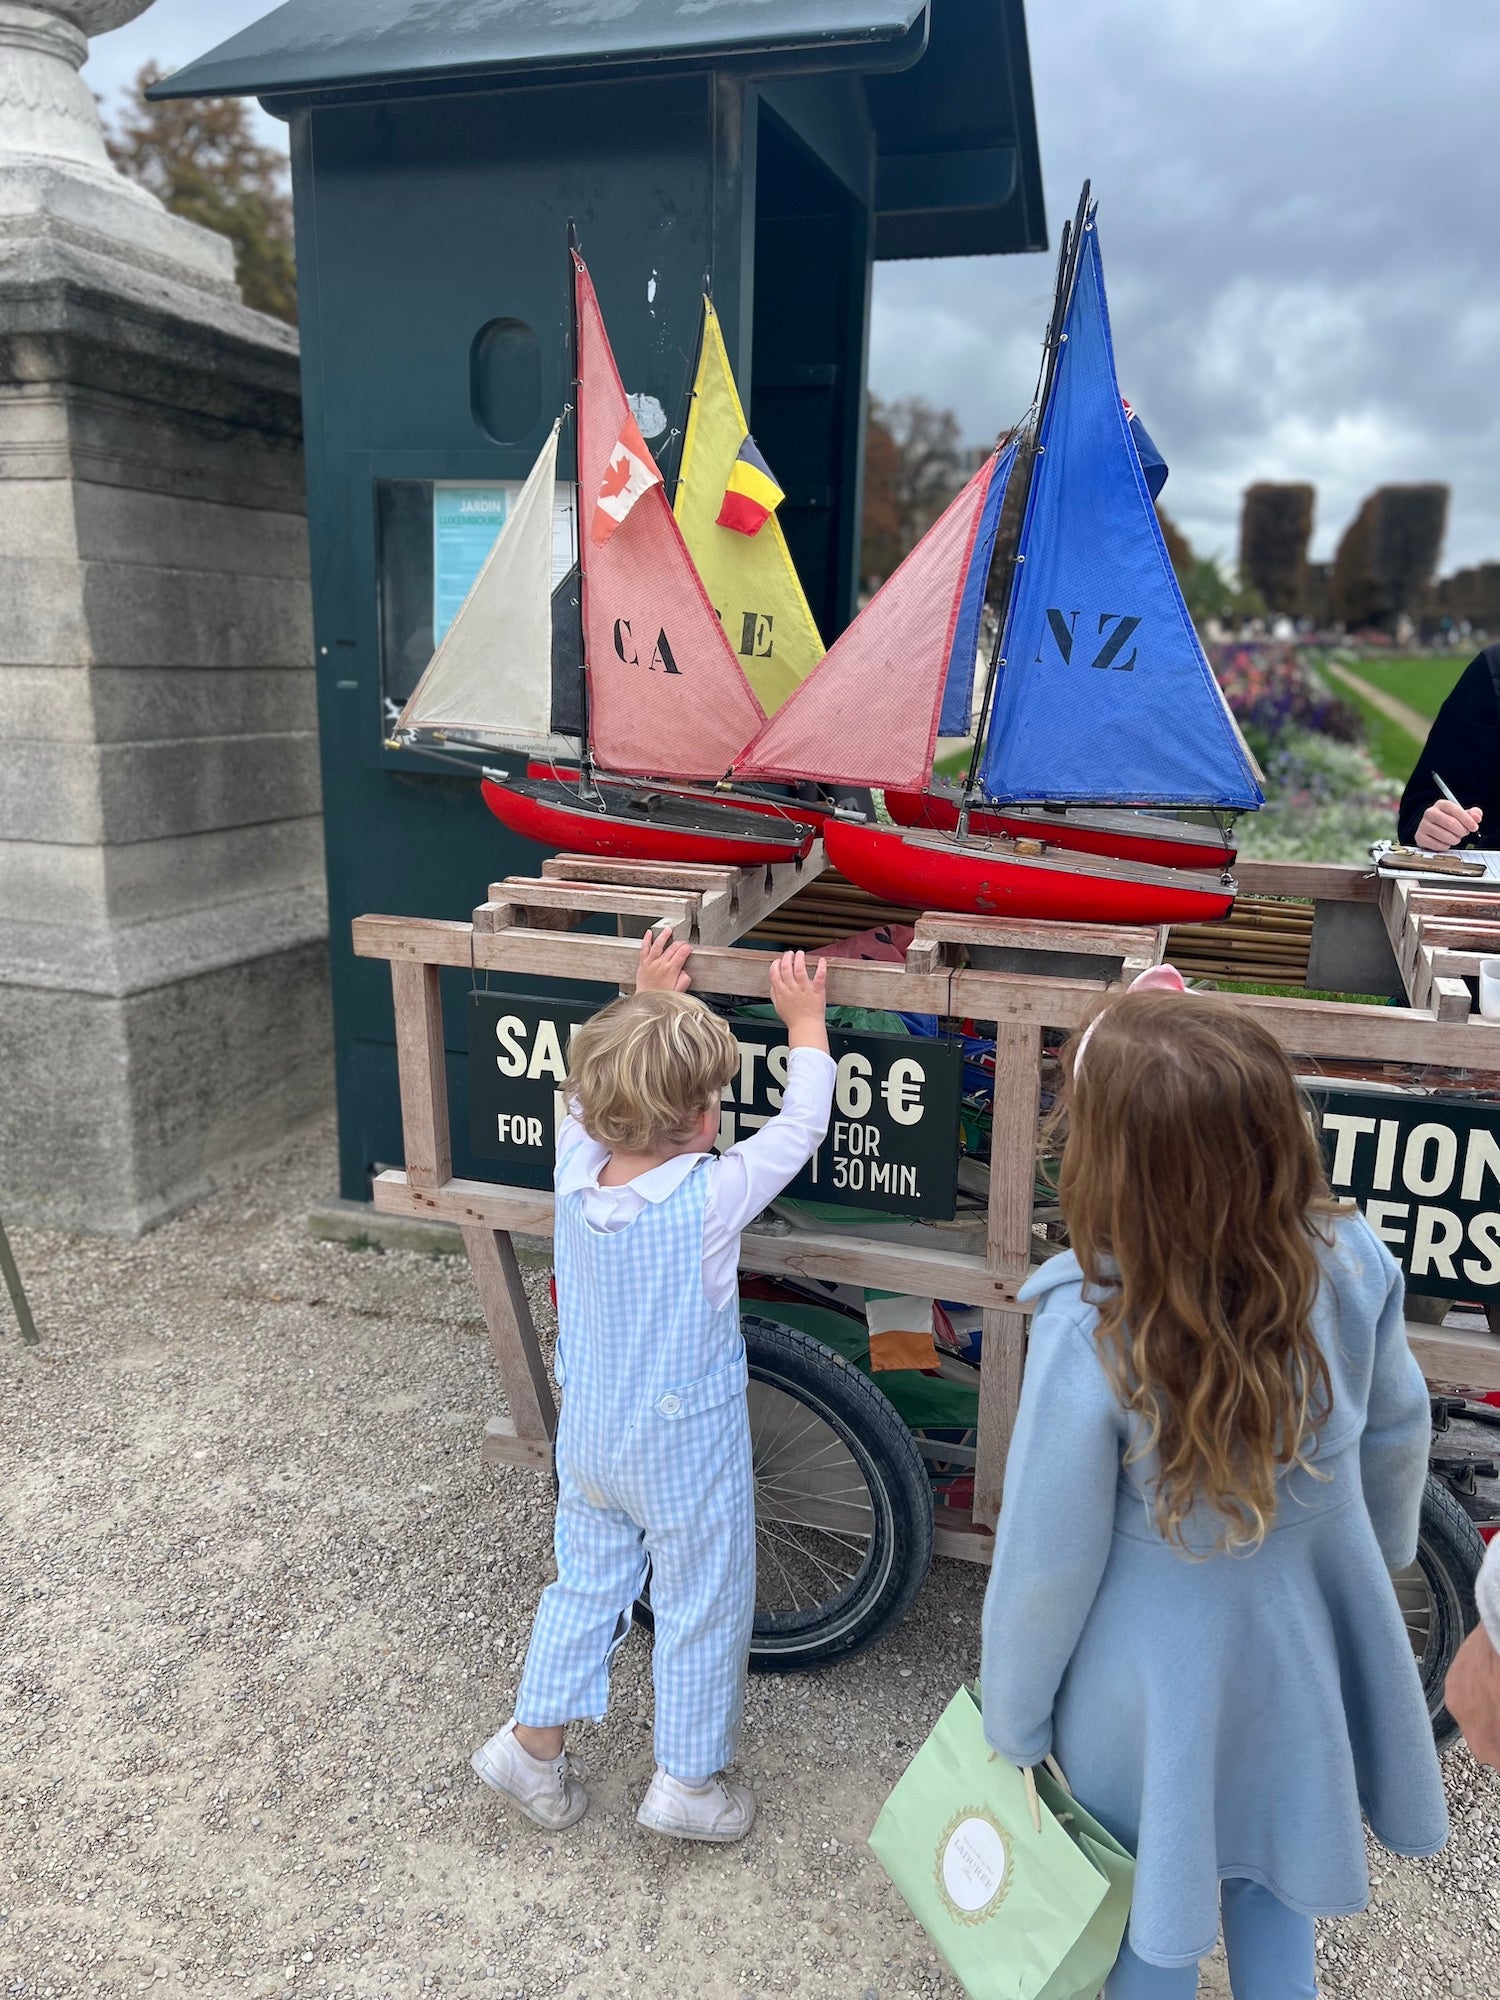 Jardin du Luxembourg sailing boats Travelling tips - Family journey to France - Paris with children what to visit and where to shop